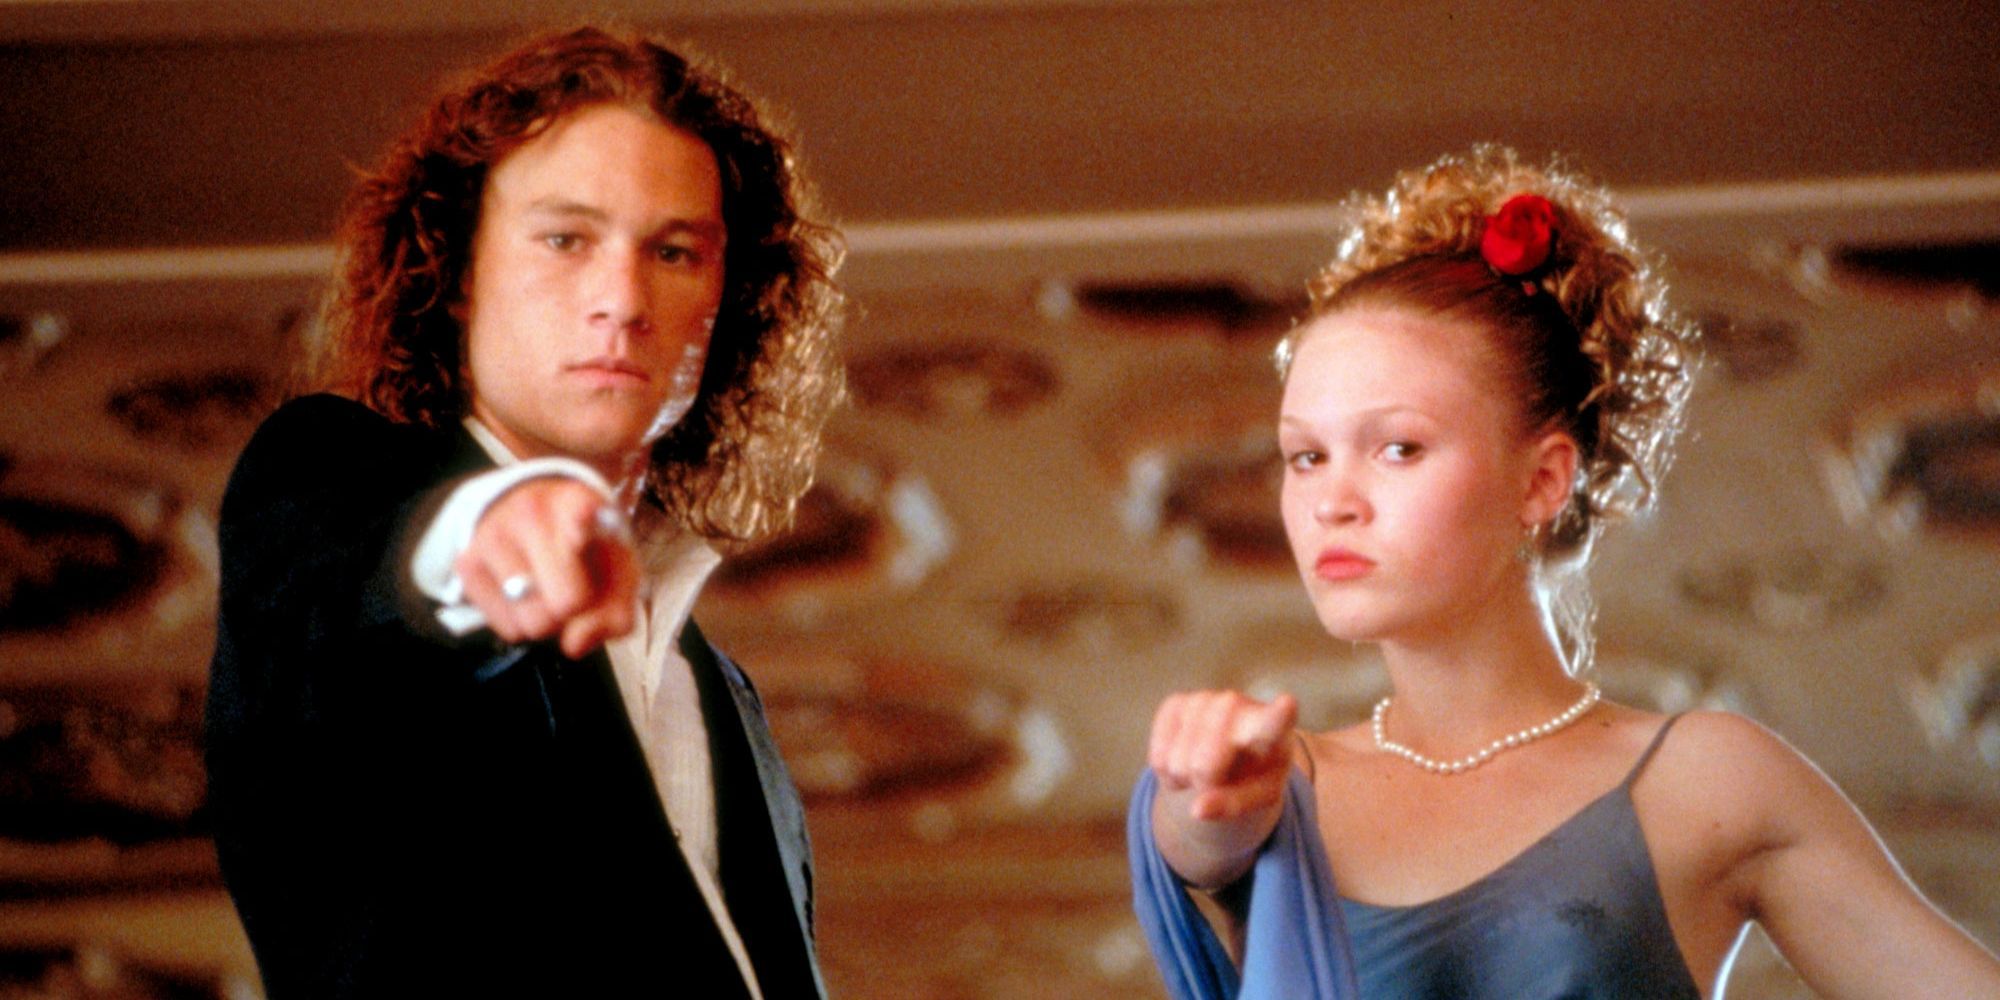 Patrick and Kat from '10 Things I Hate About You' standing together